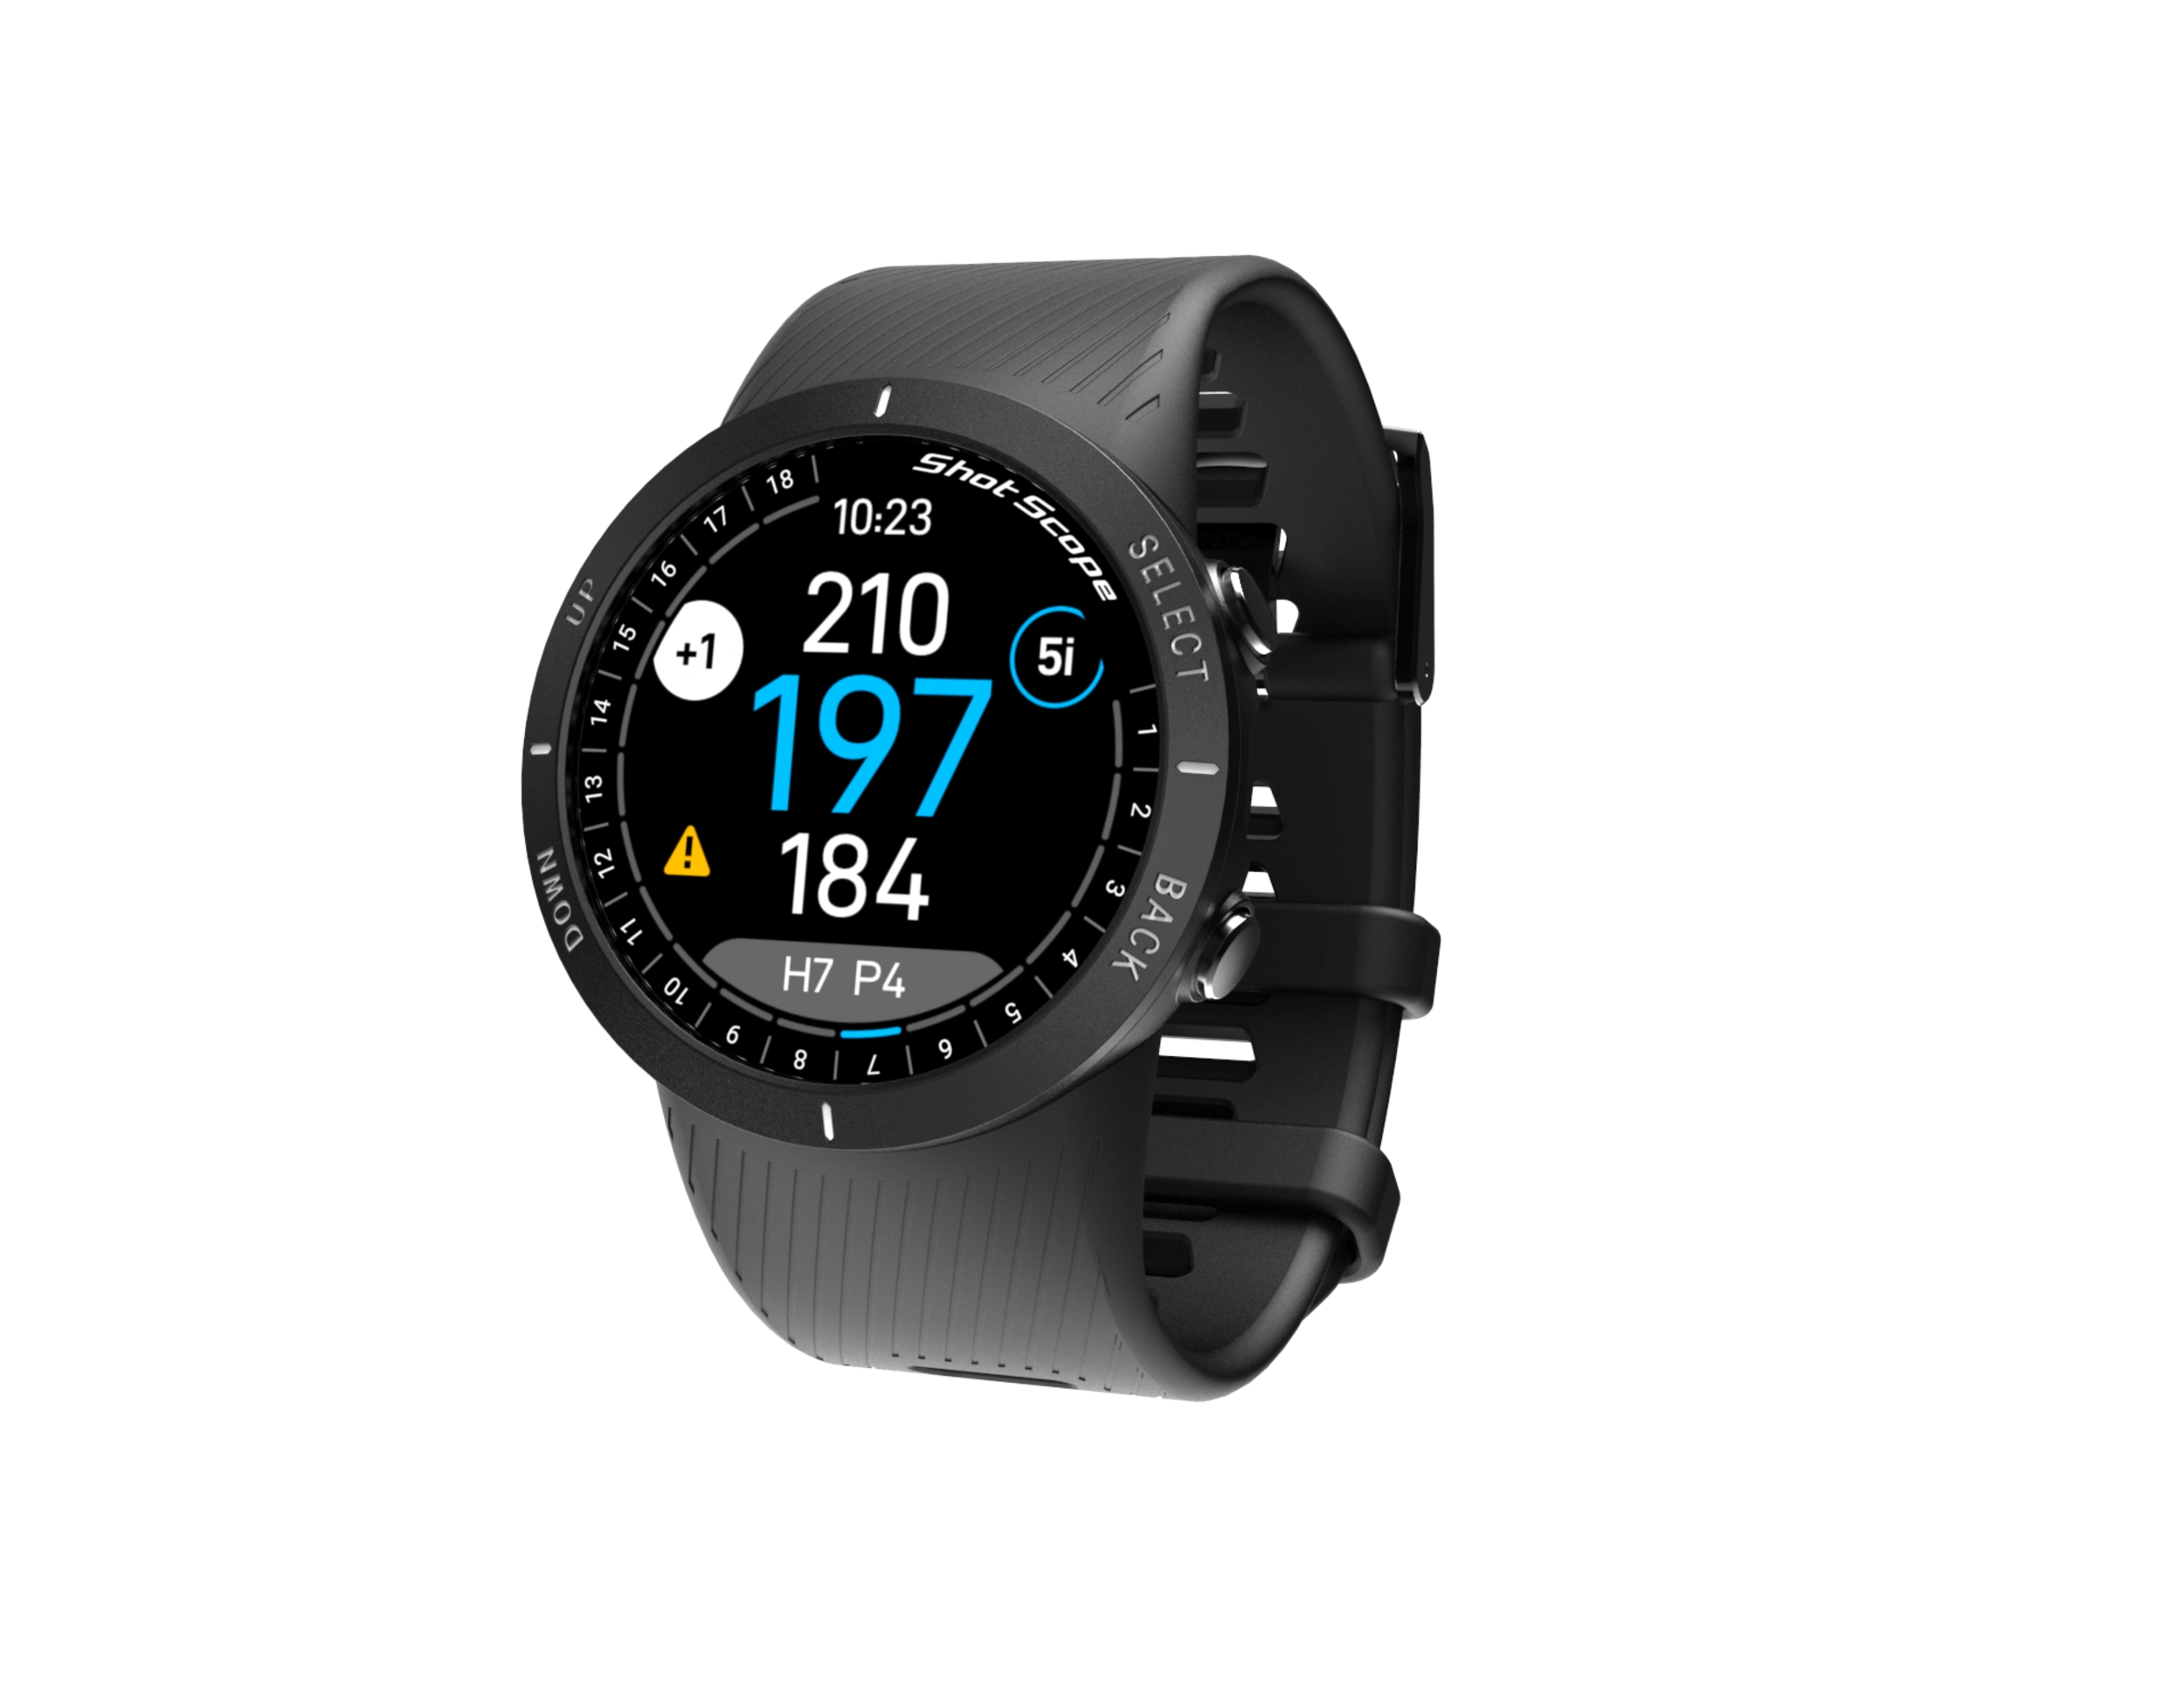 Shot Scope V5 GPS Watch + 16x Tracking Tags